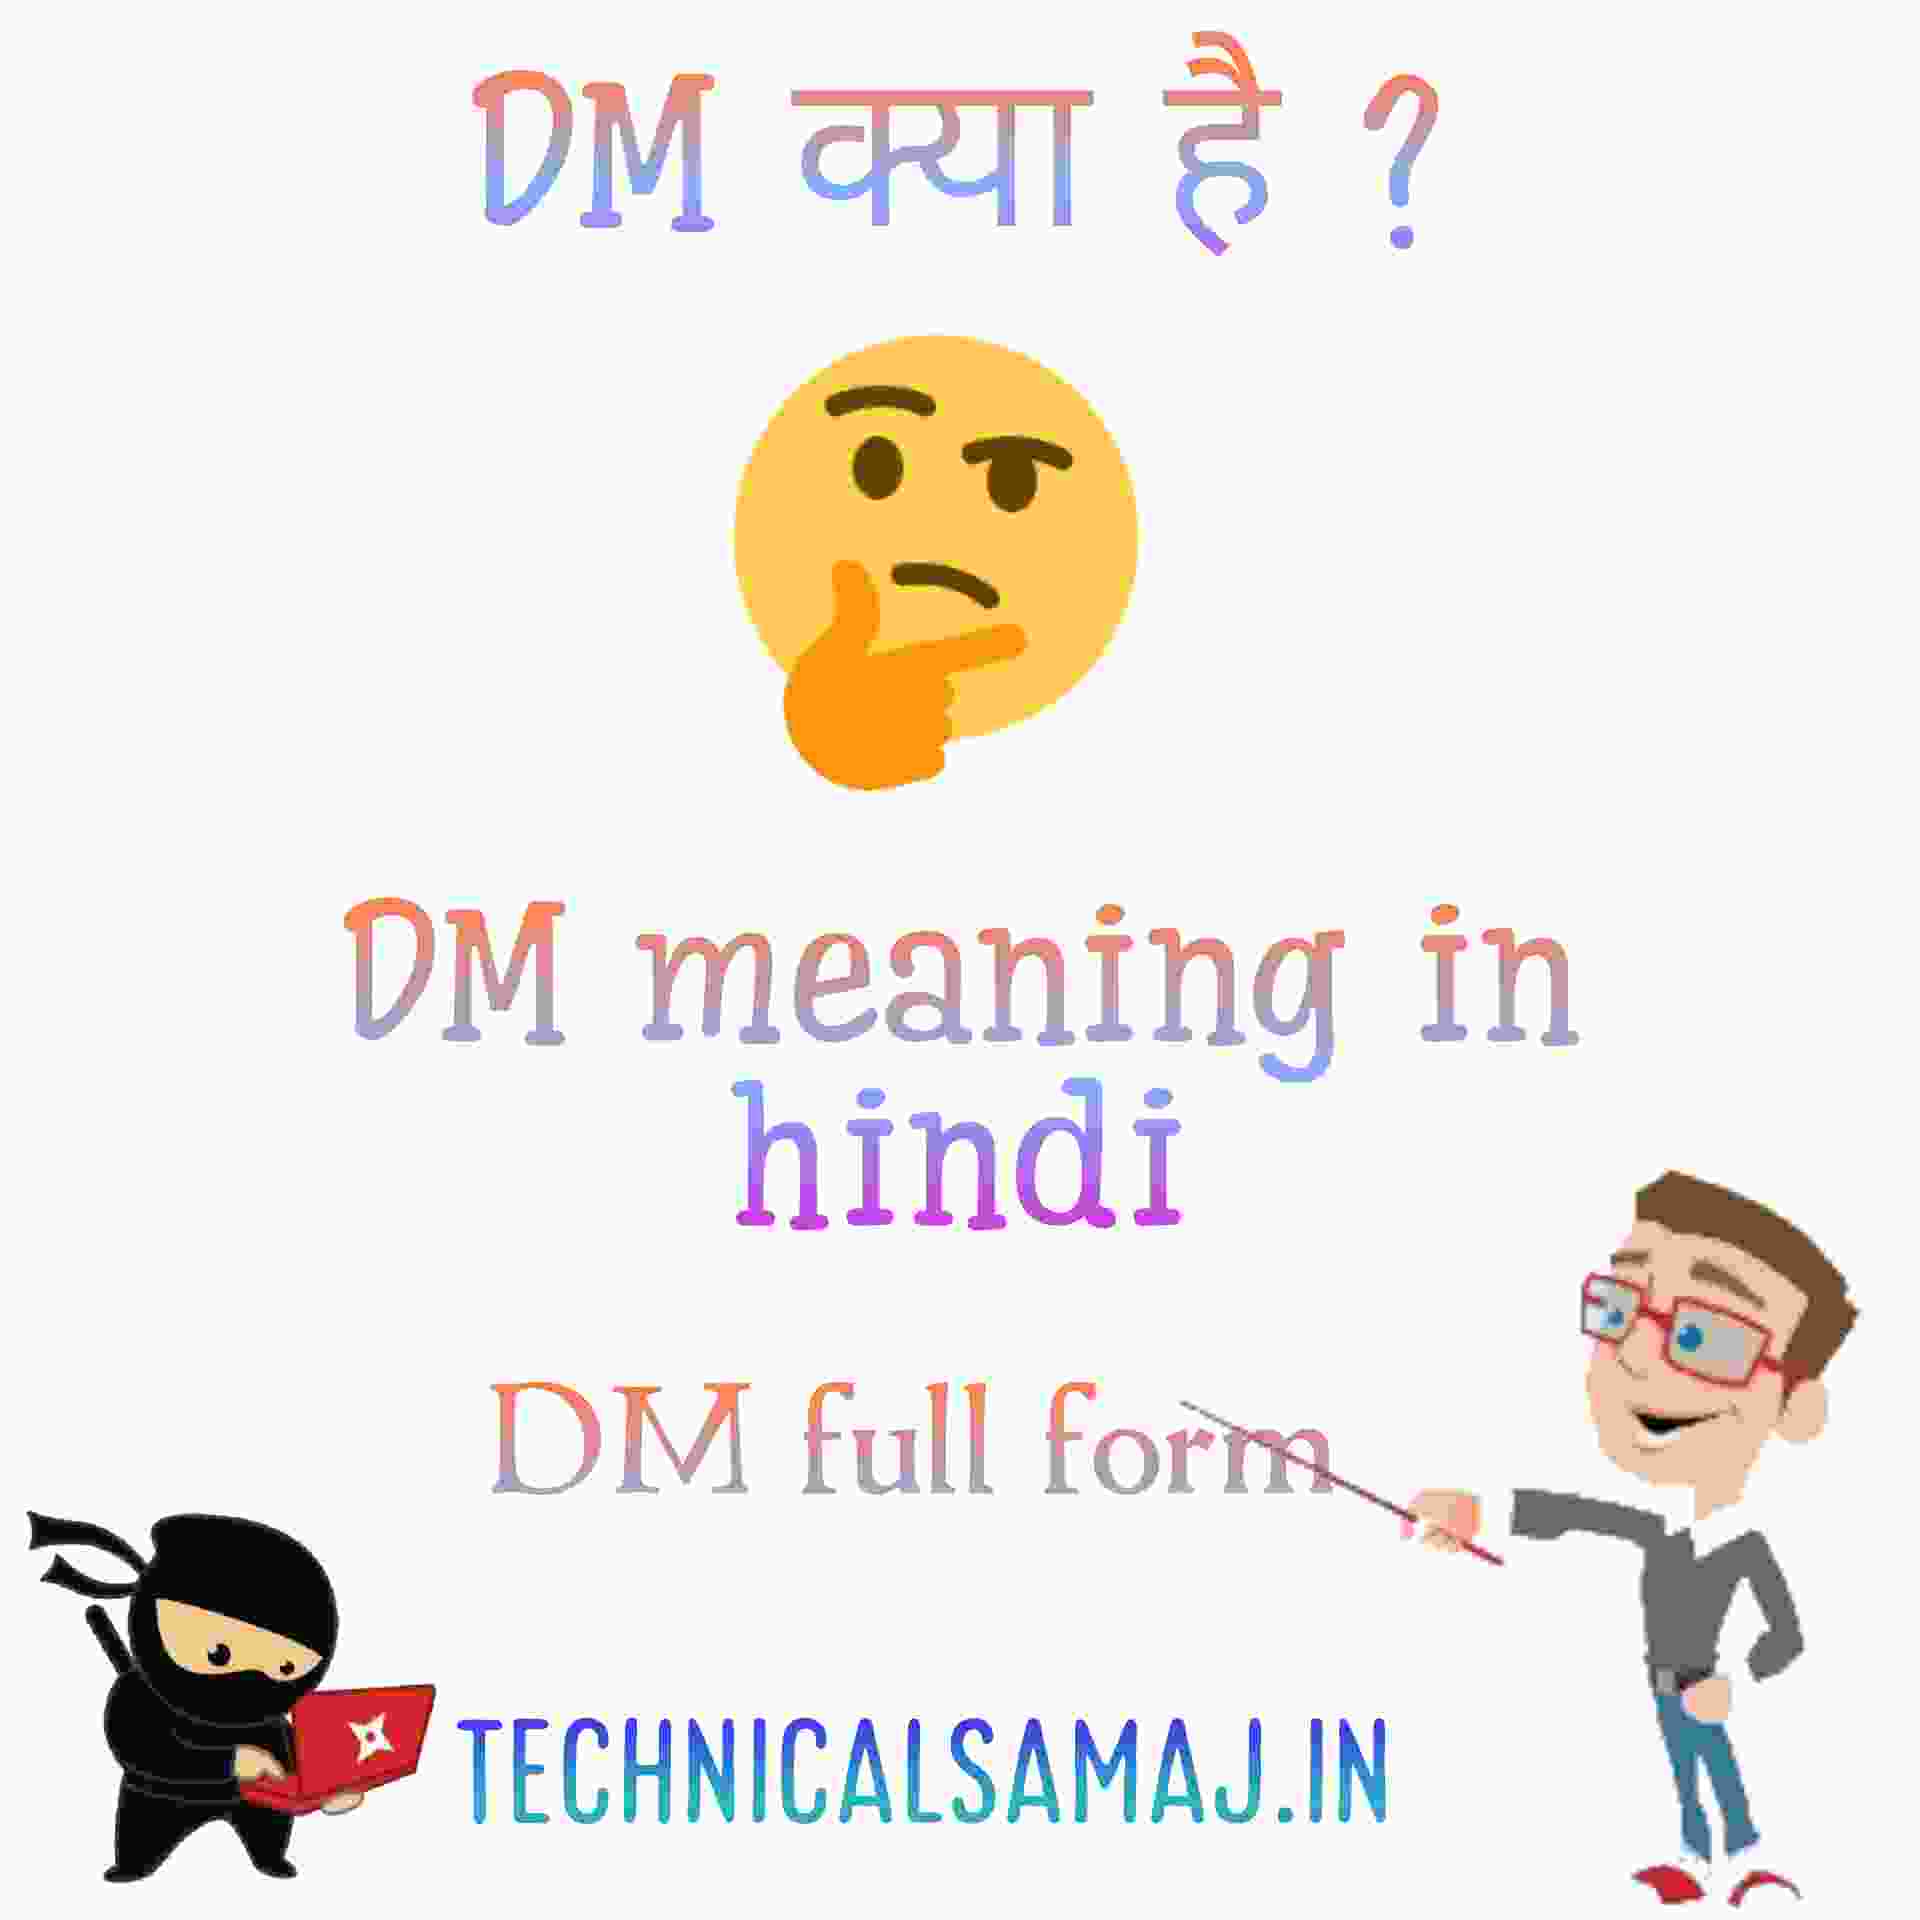 dm meaning in hindi, dm full form meaning in hindi, dm your name meaning in hindi, dm meaning in english, dm for sfs meaning in hindi, dm meaning in punjabi, dm for collaboration meaning in hindi, dm me meaning,dm full form,dm full form in instagram,dm full form in hindi